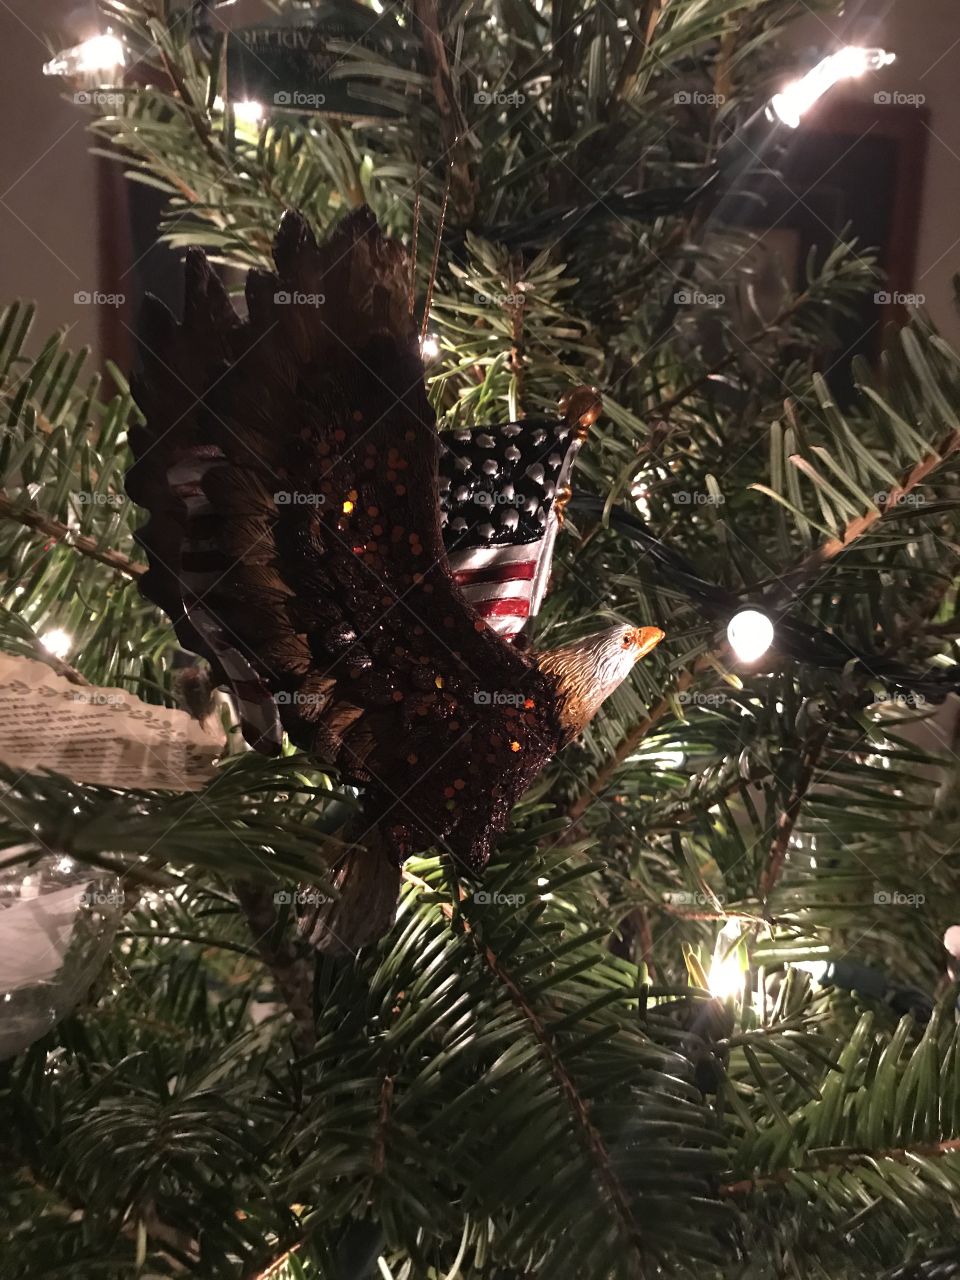 Eagle ornament in Christmas tree